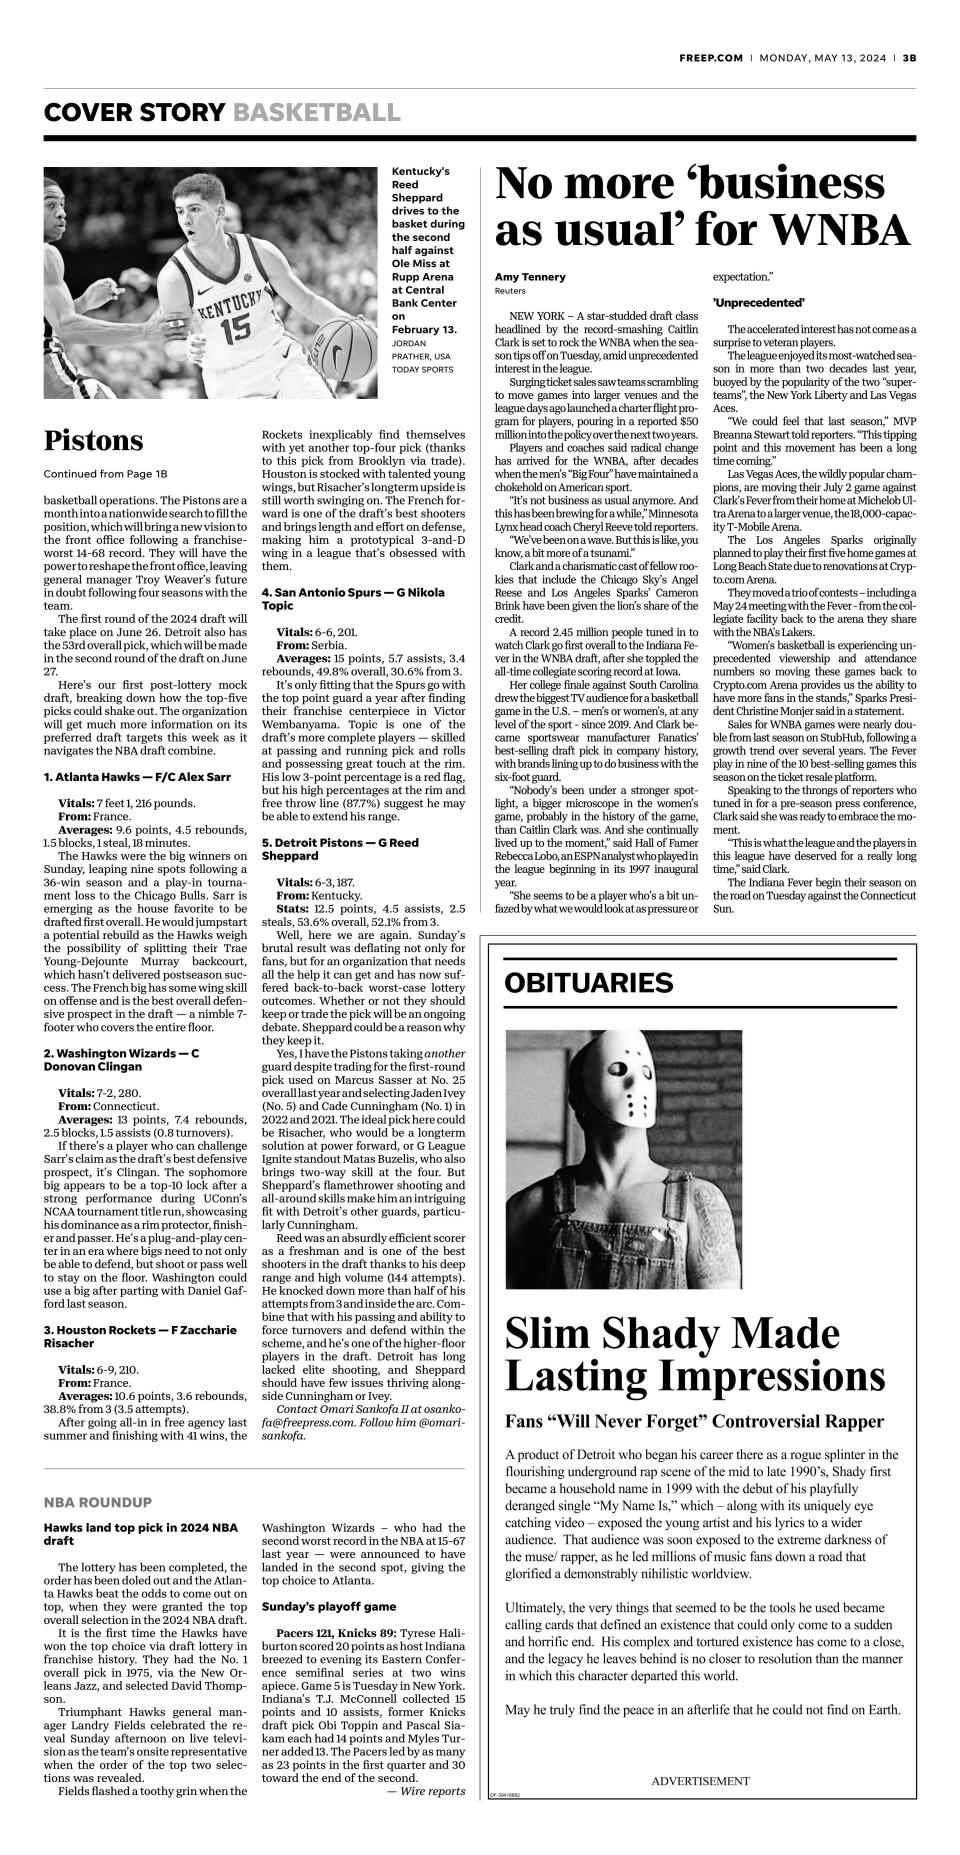 The Monday print edition of the Detroit Free Press includes an ad in the form of an obituary for Eminem's Slim Shady character